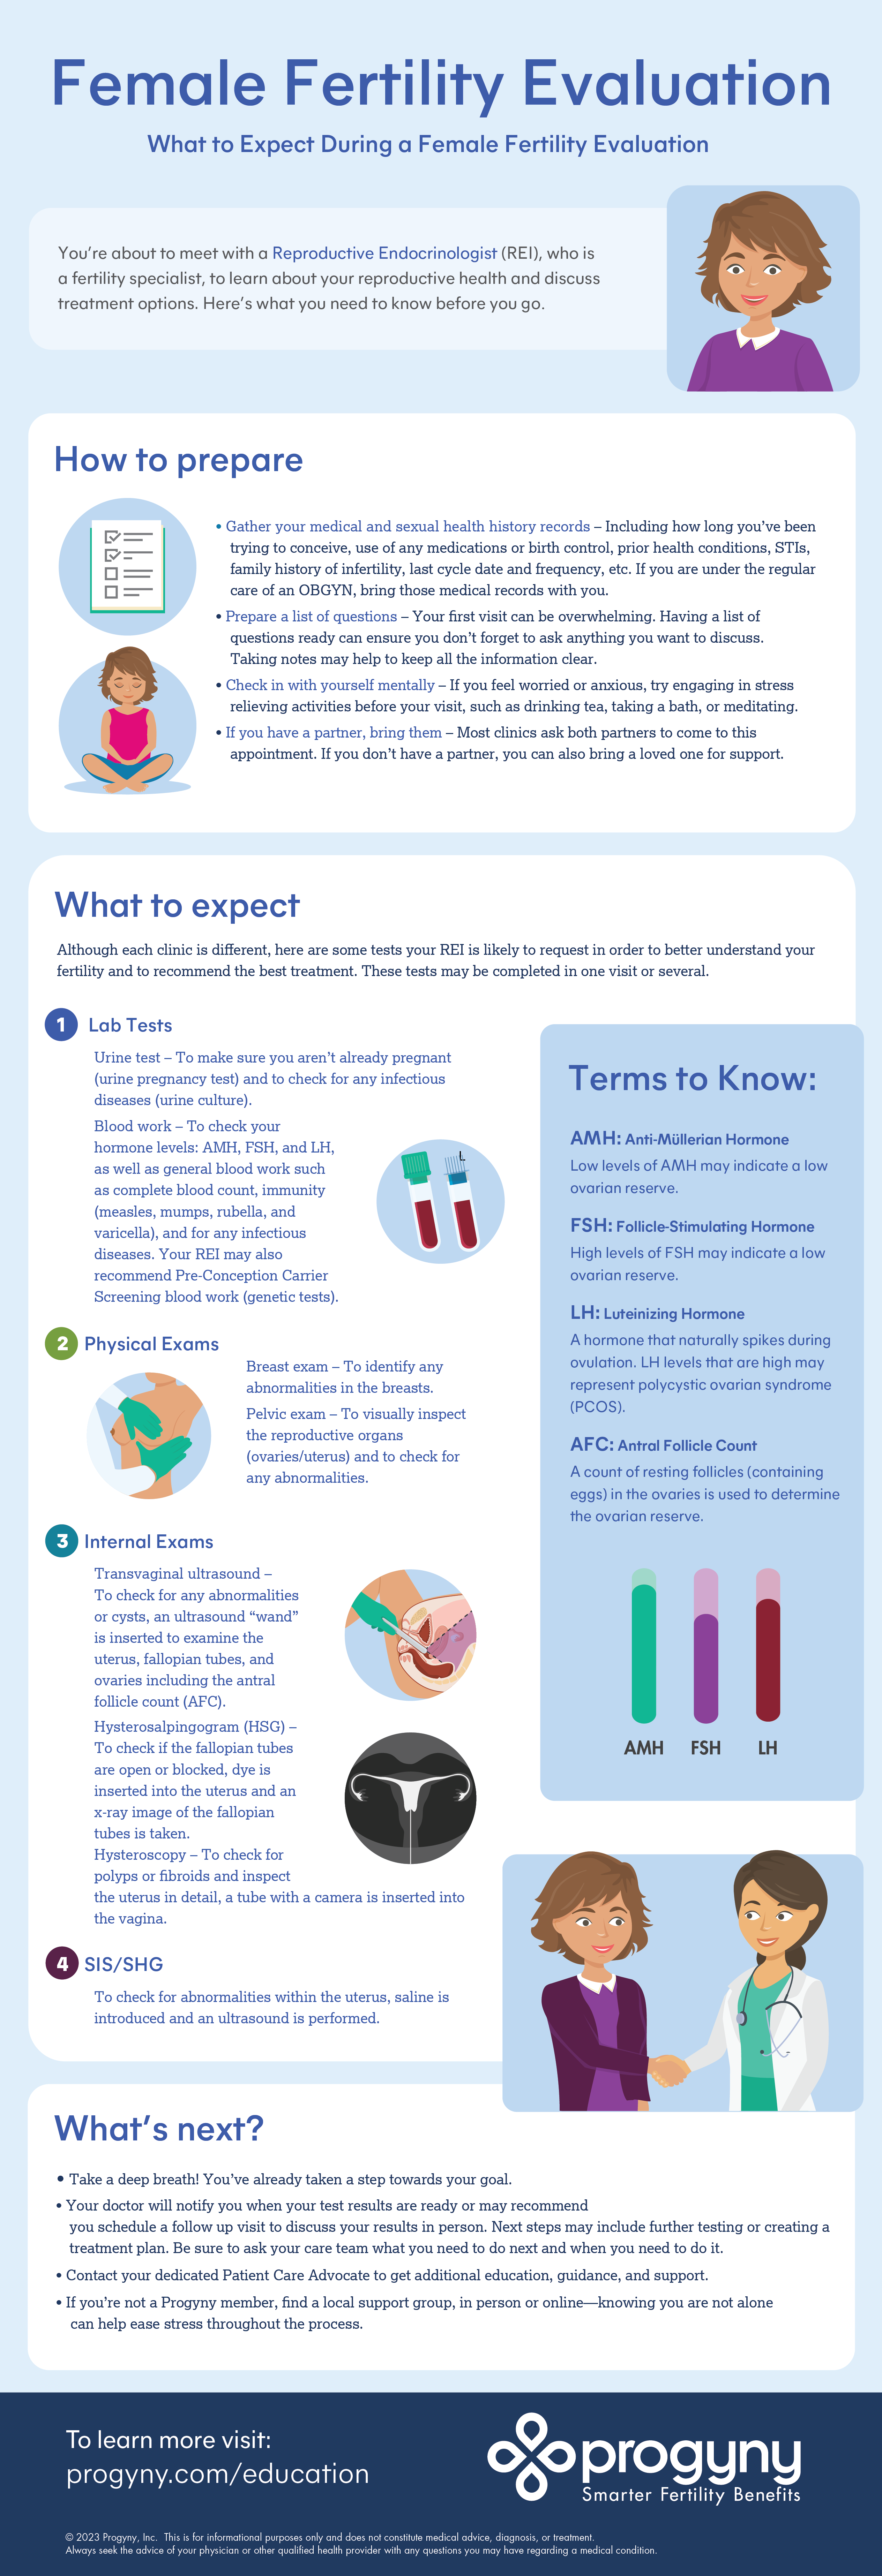 Illustrated infographic describing what to expect during an evaluation with a reproductive endocrinologist, a fertility specialist